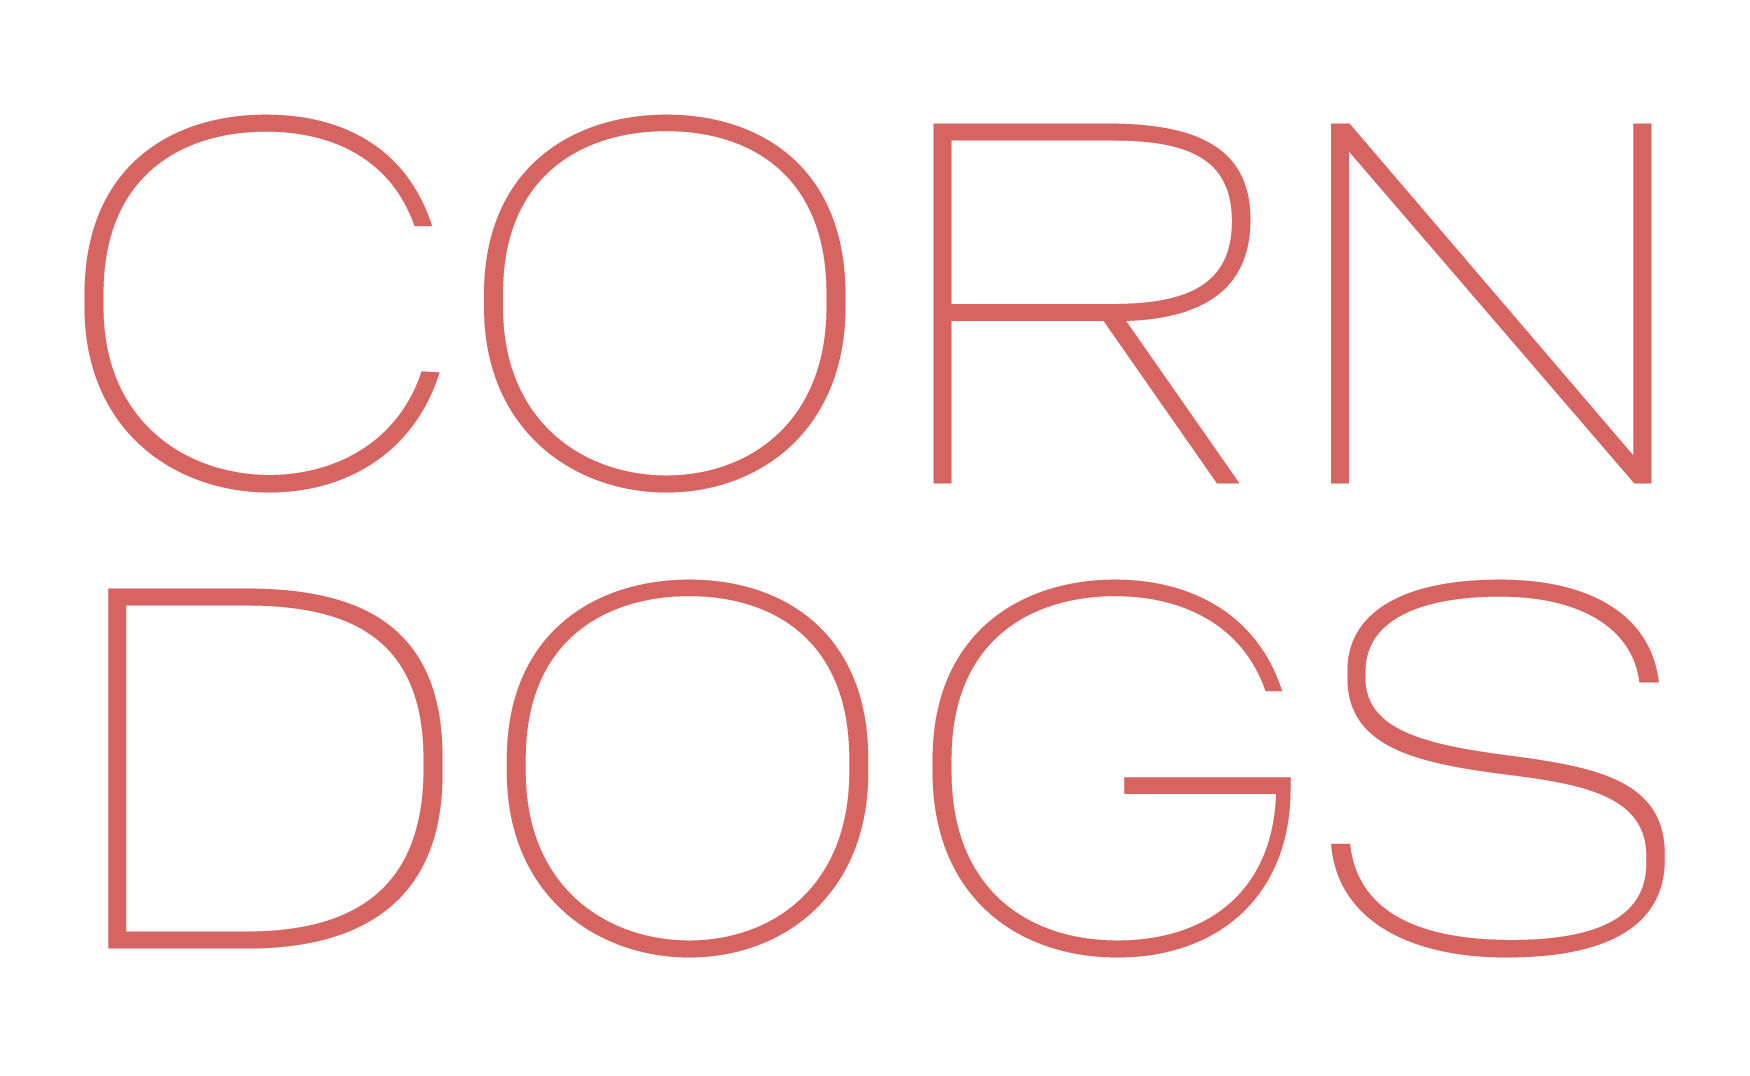 I was pleasantly surprised to see that the words ‘CORN DOGS’ naturally justify almost perfectly in the SONIC Sans Extended Light font.